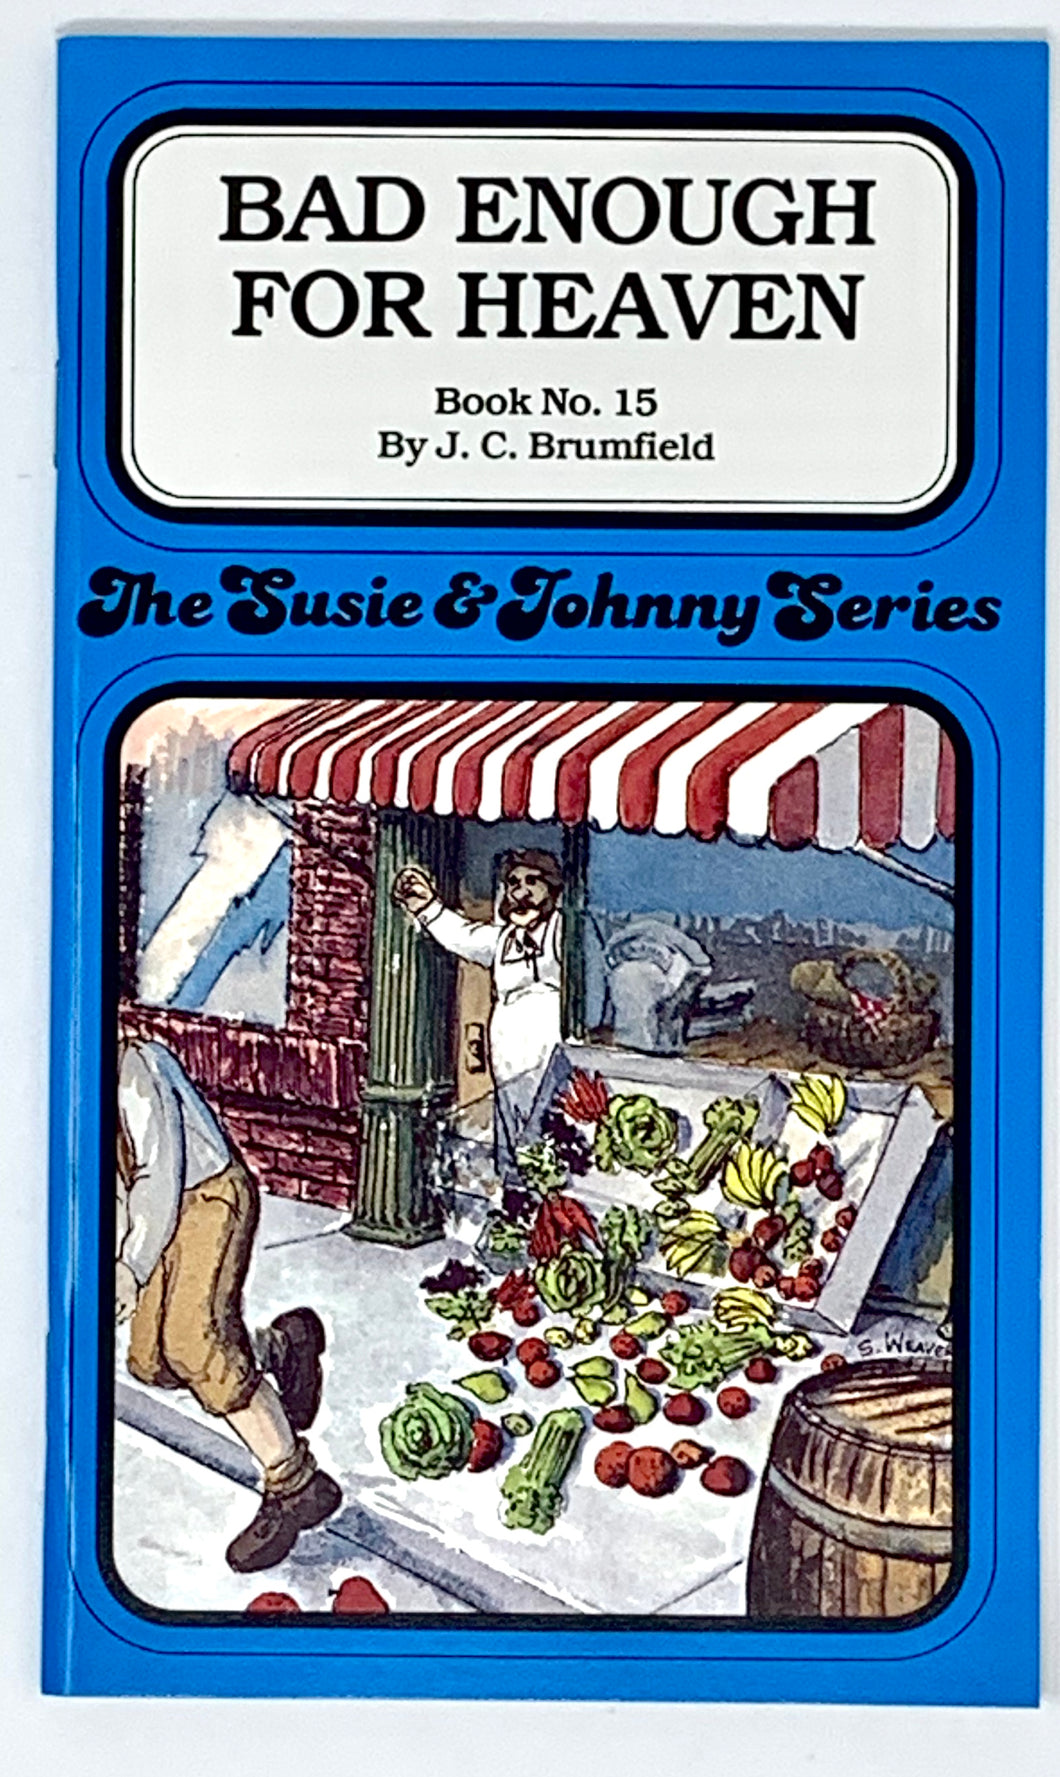 THE SUSIE & JOHNNY SERIES BOOK #15 